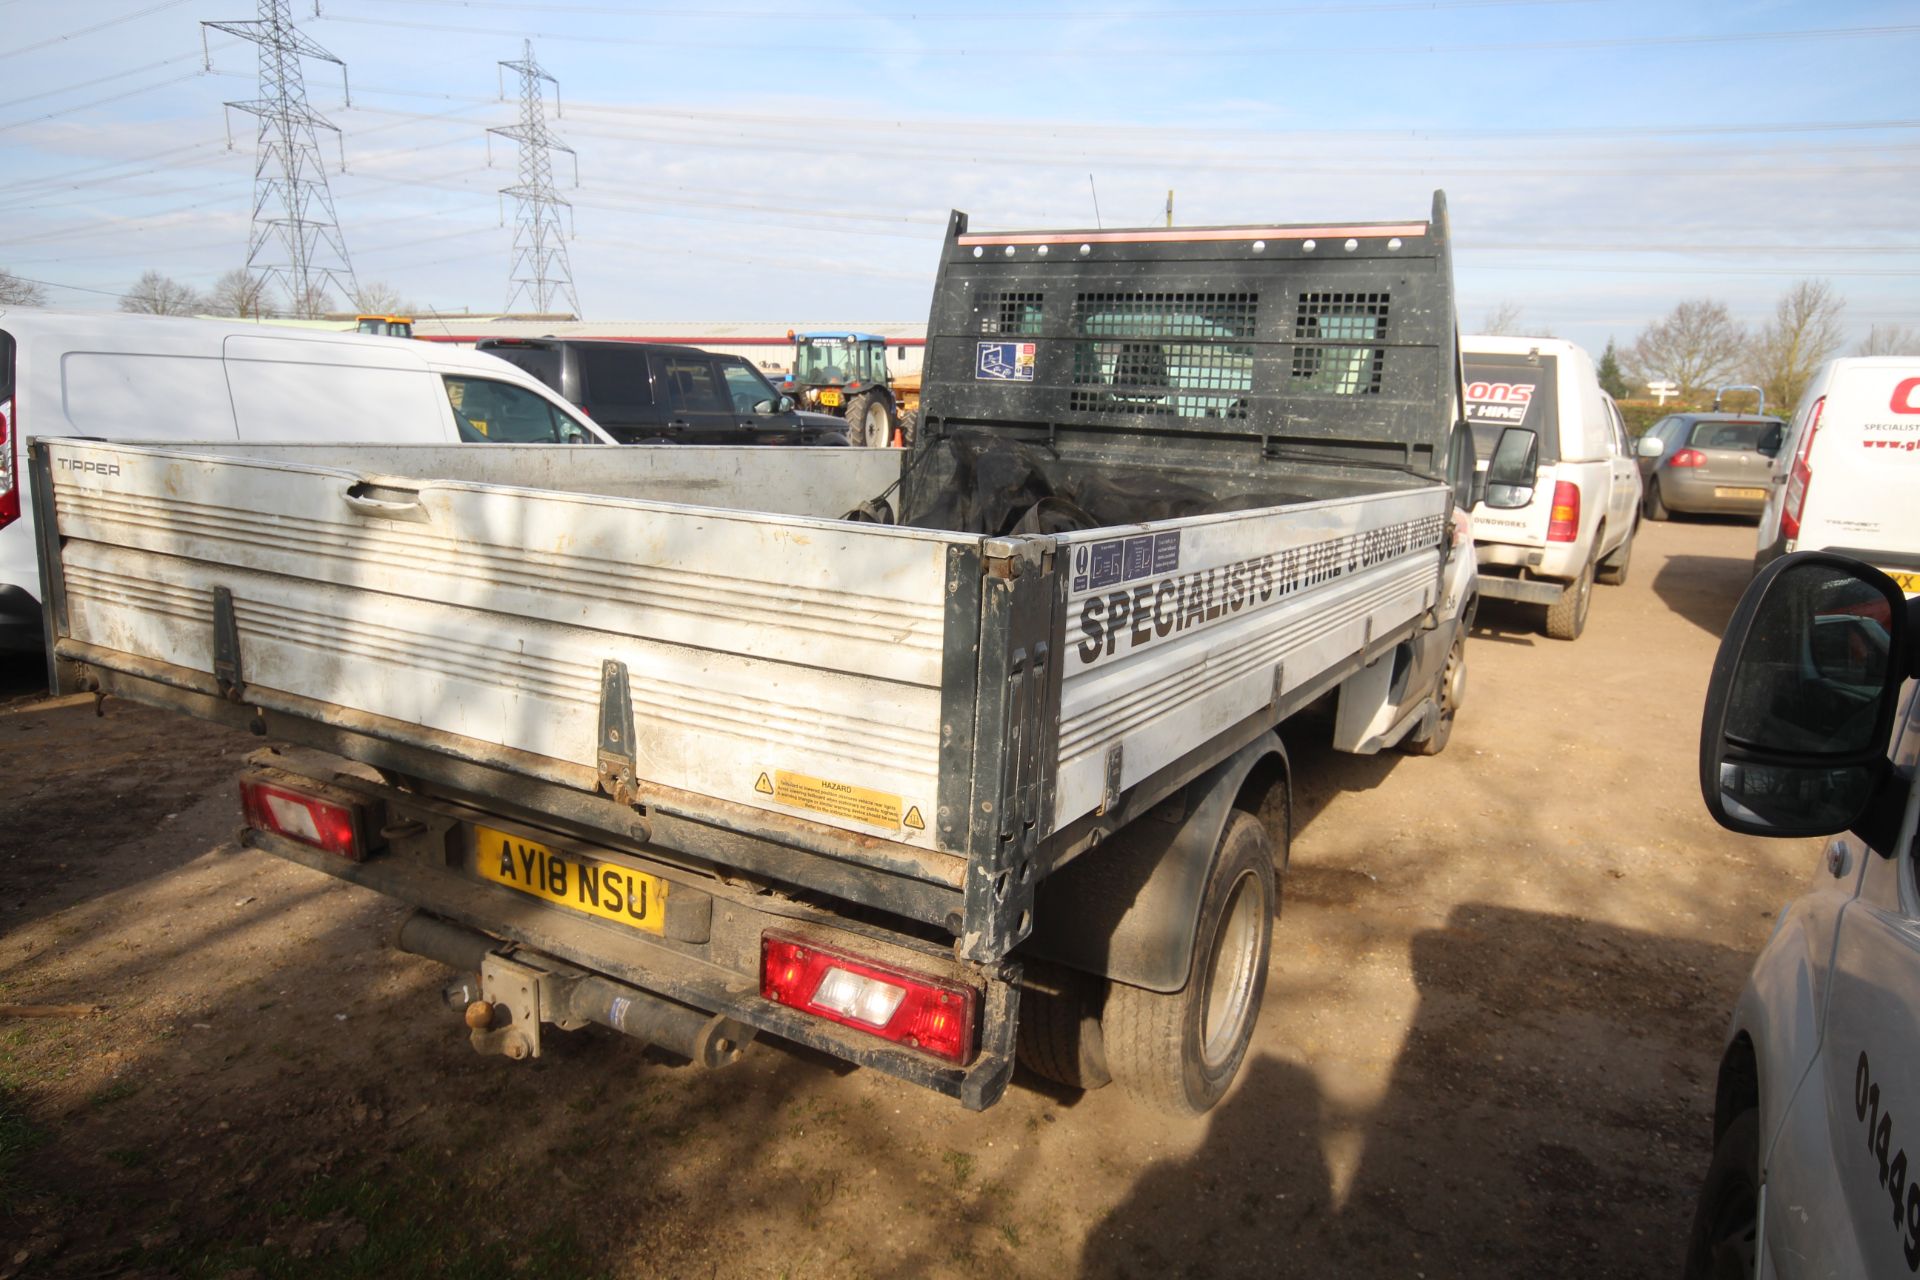 Ford Transit 350 2L diesel manual drop-side tipper. Registration AY18 NSU. Date of first - Image 2 of 64